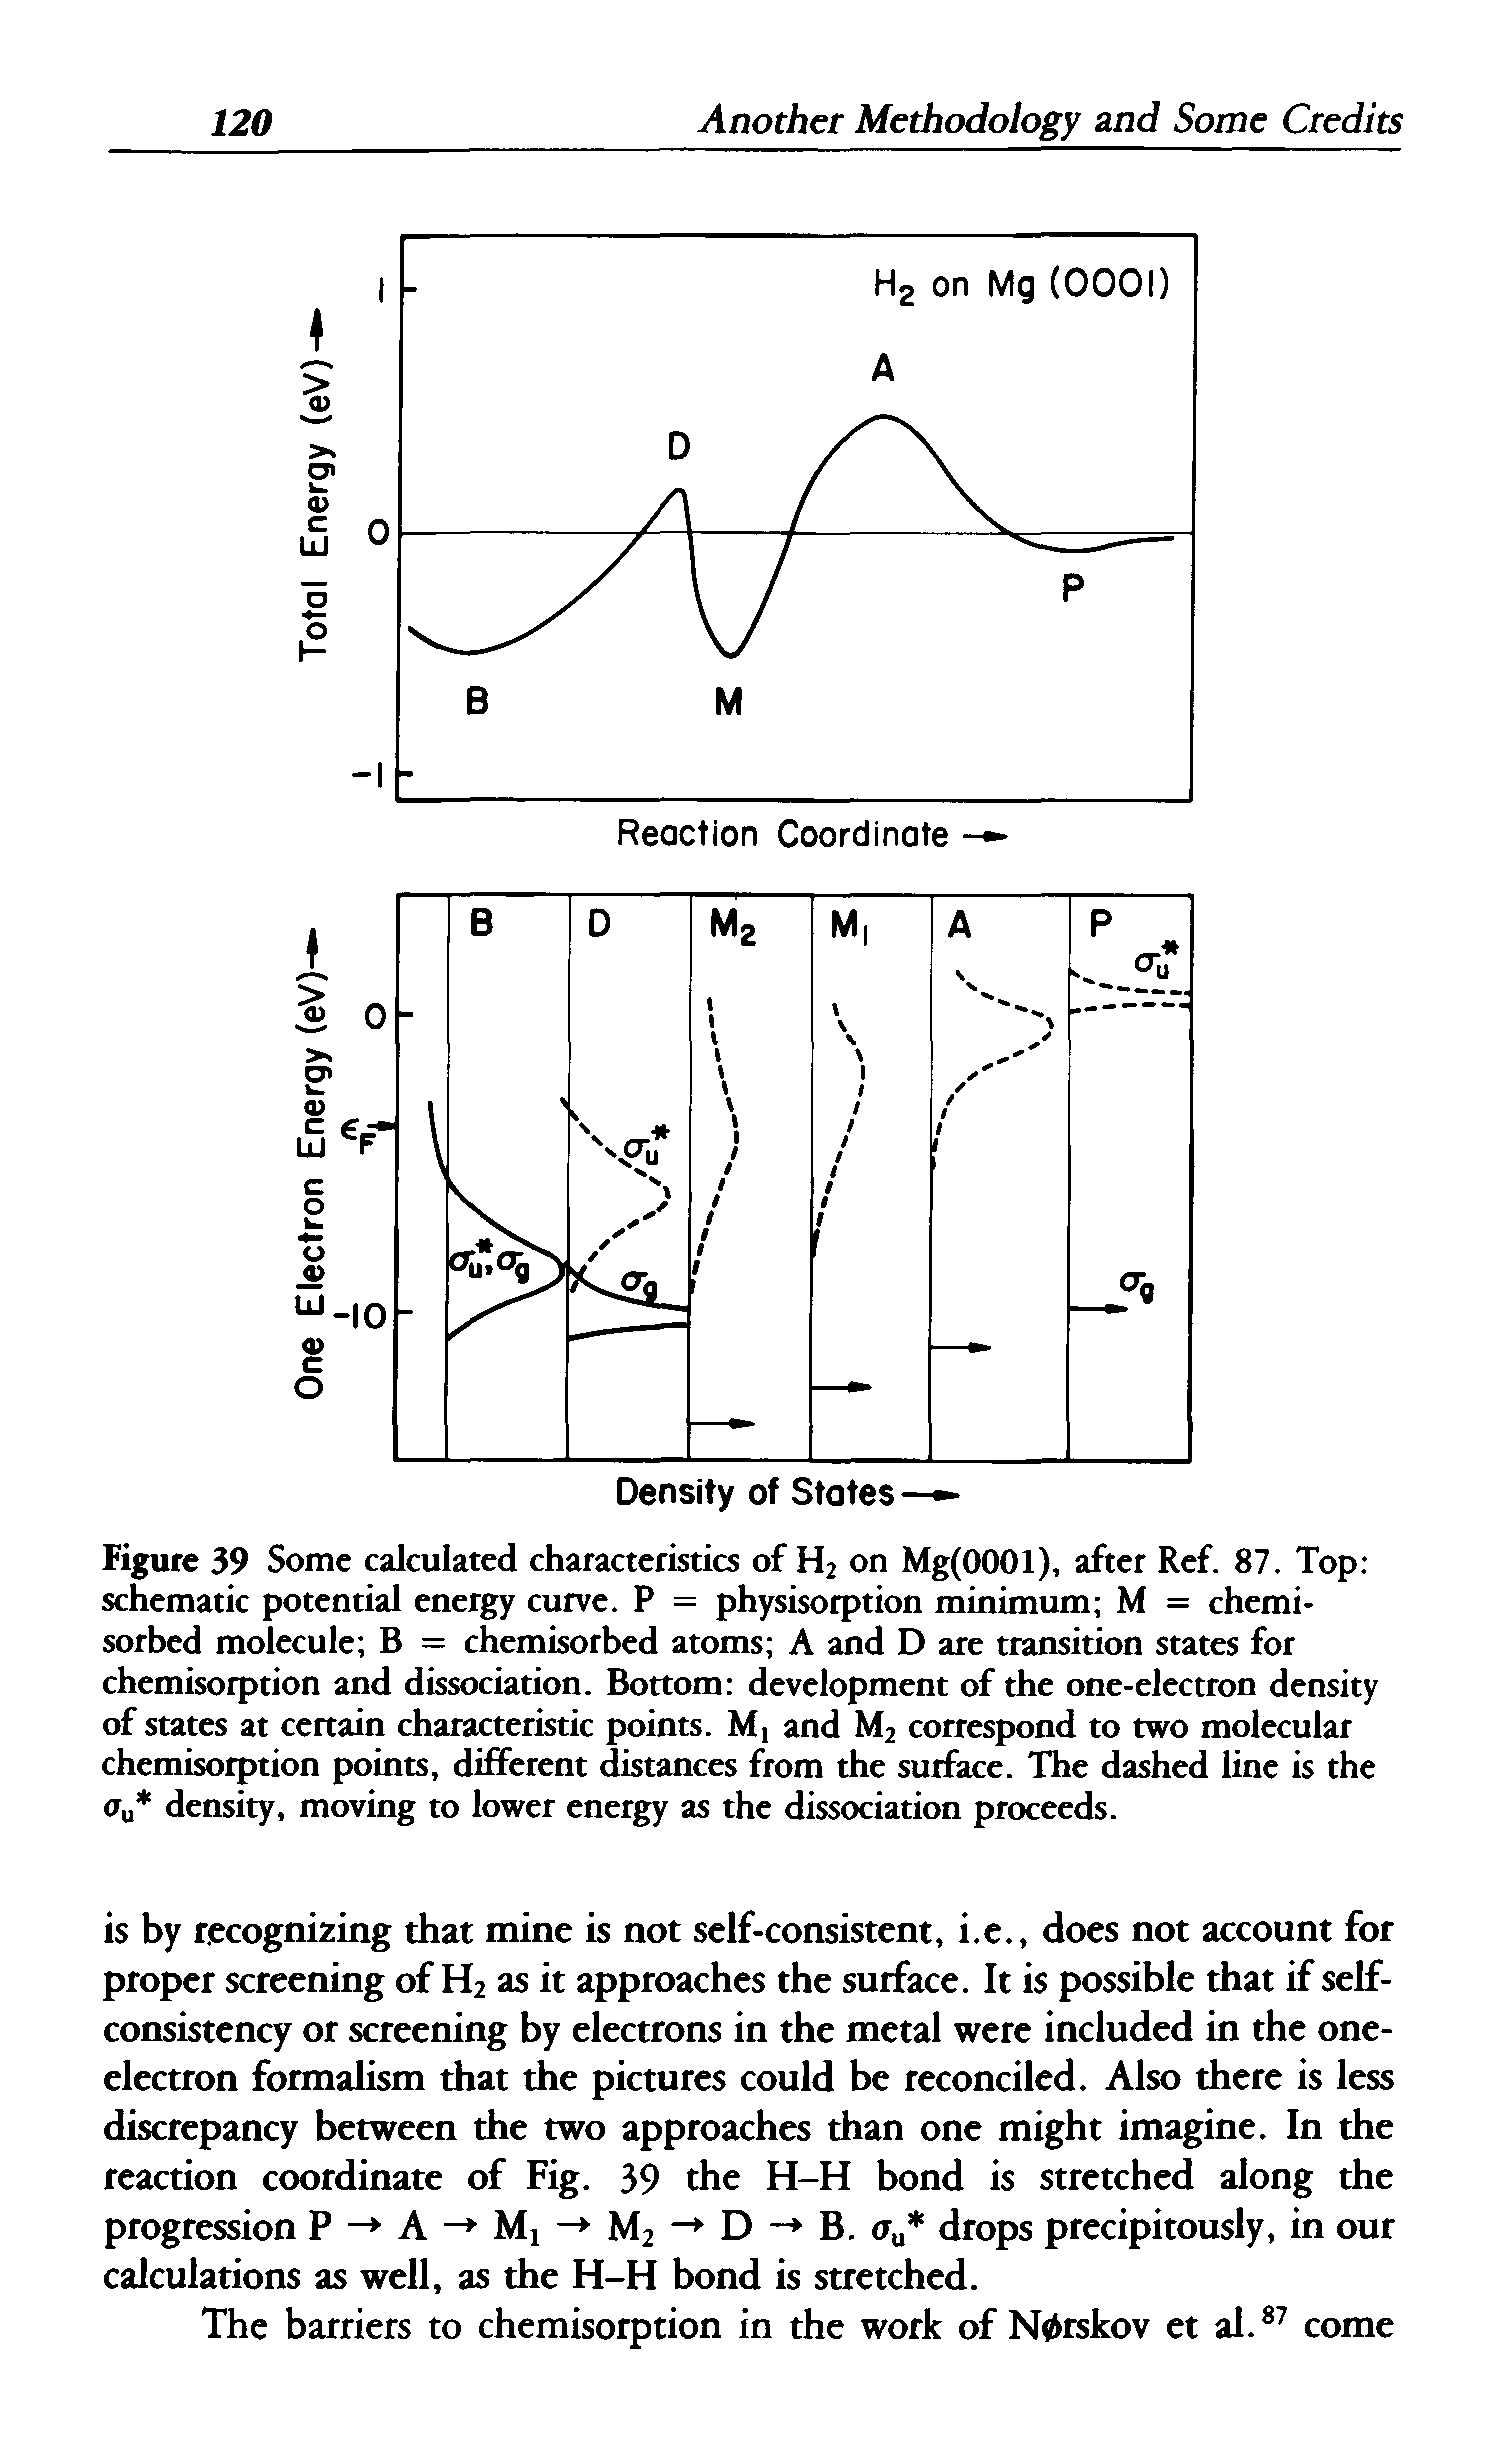 Figure 39 Some calculated characteristics of H2 on Mg(0001), after Ref. 87. Top schematic potential energy curve. P = physisorption minimum M = chemisorbed molecule B = chemisorbed atoms A and D are transition states for chemisorption and dissociation. Bottom development of the one-electron density of states at certain characteristic points. M and M2 correspond to two molecular chemisorption points, different distances from the surface. The dashed line is the au density, moving to lower energy as the dissociation proceeds.